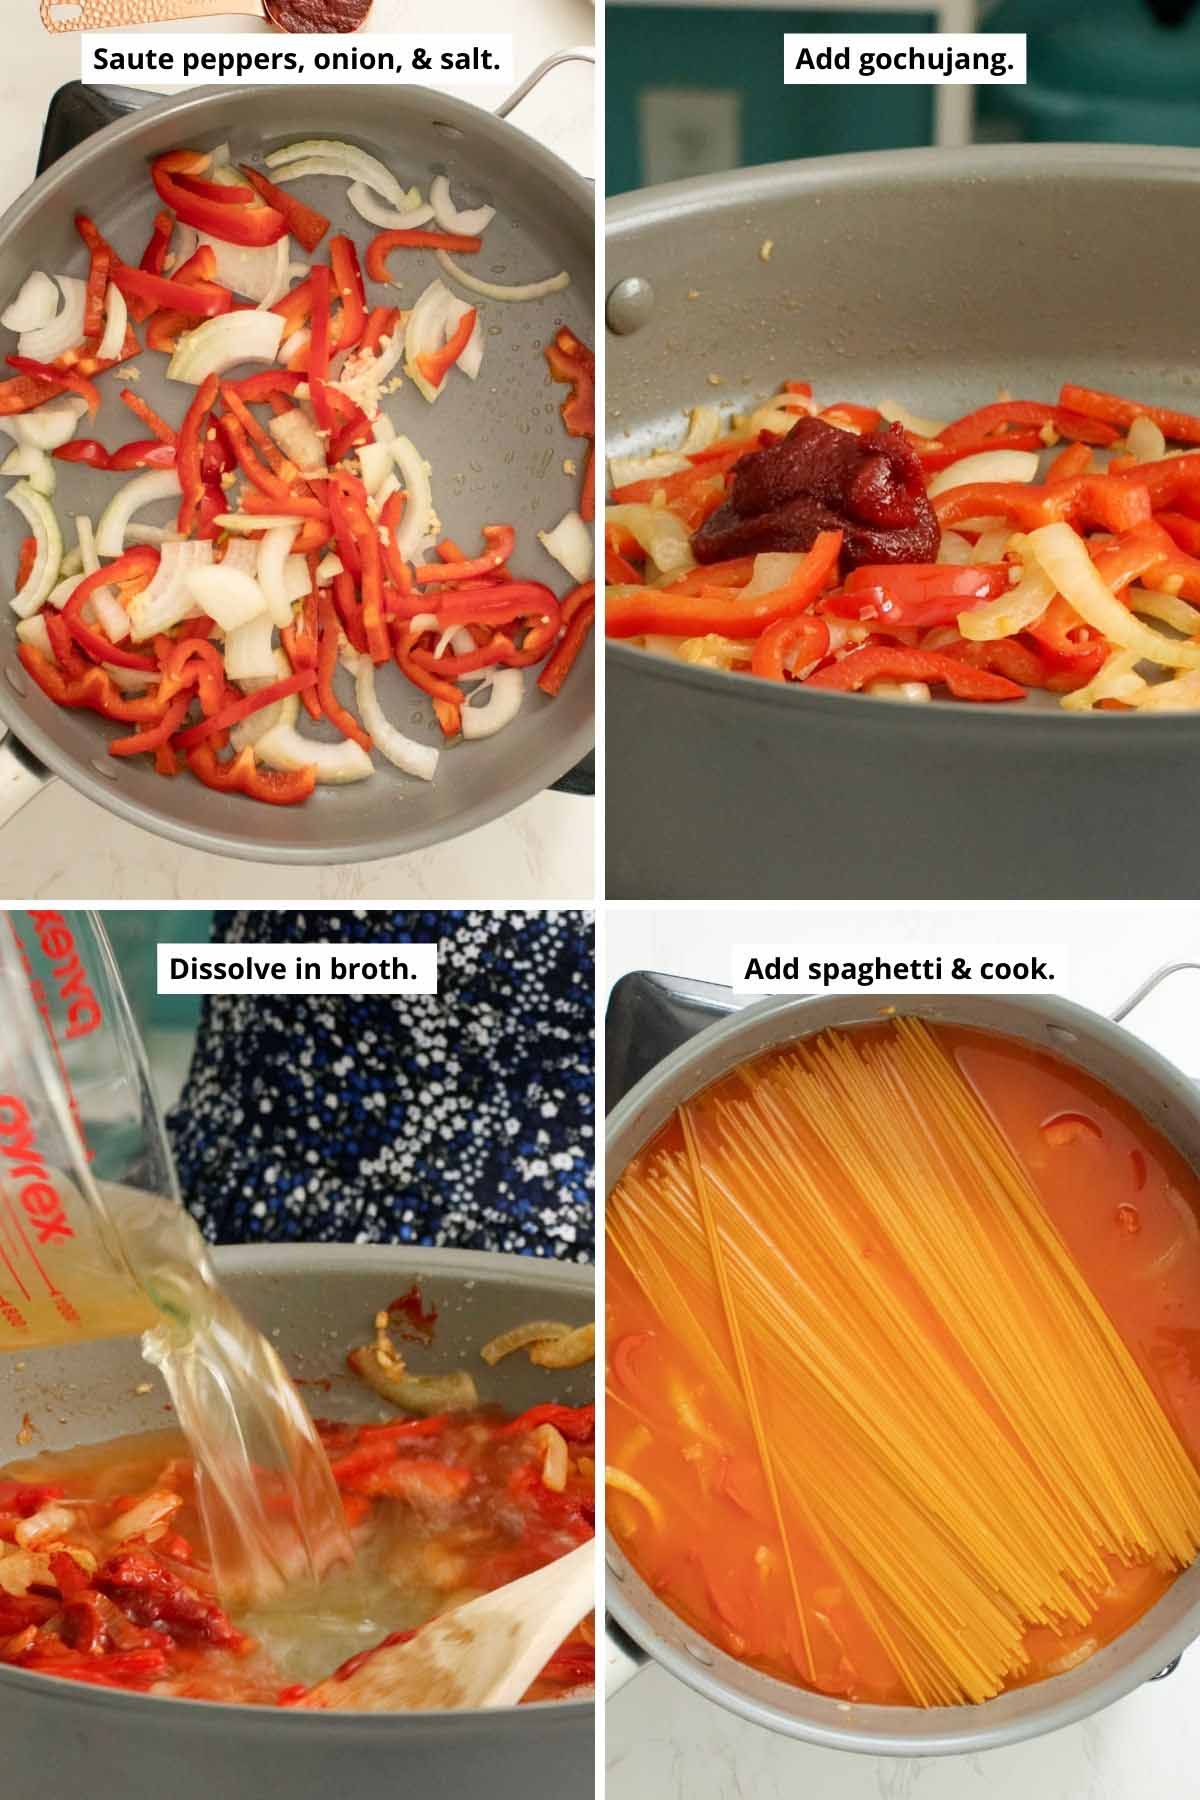 image collage showing the veggies before cooking and after with the gochujang added, pouring the broth into the pan, and the spaghetti pressed into the liquid in the pan